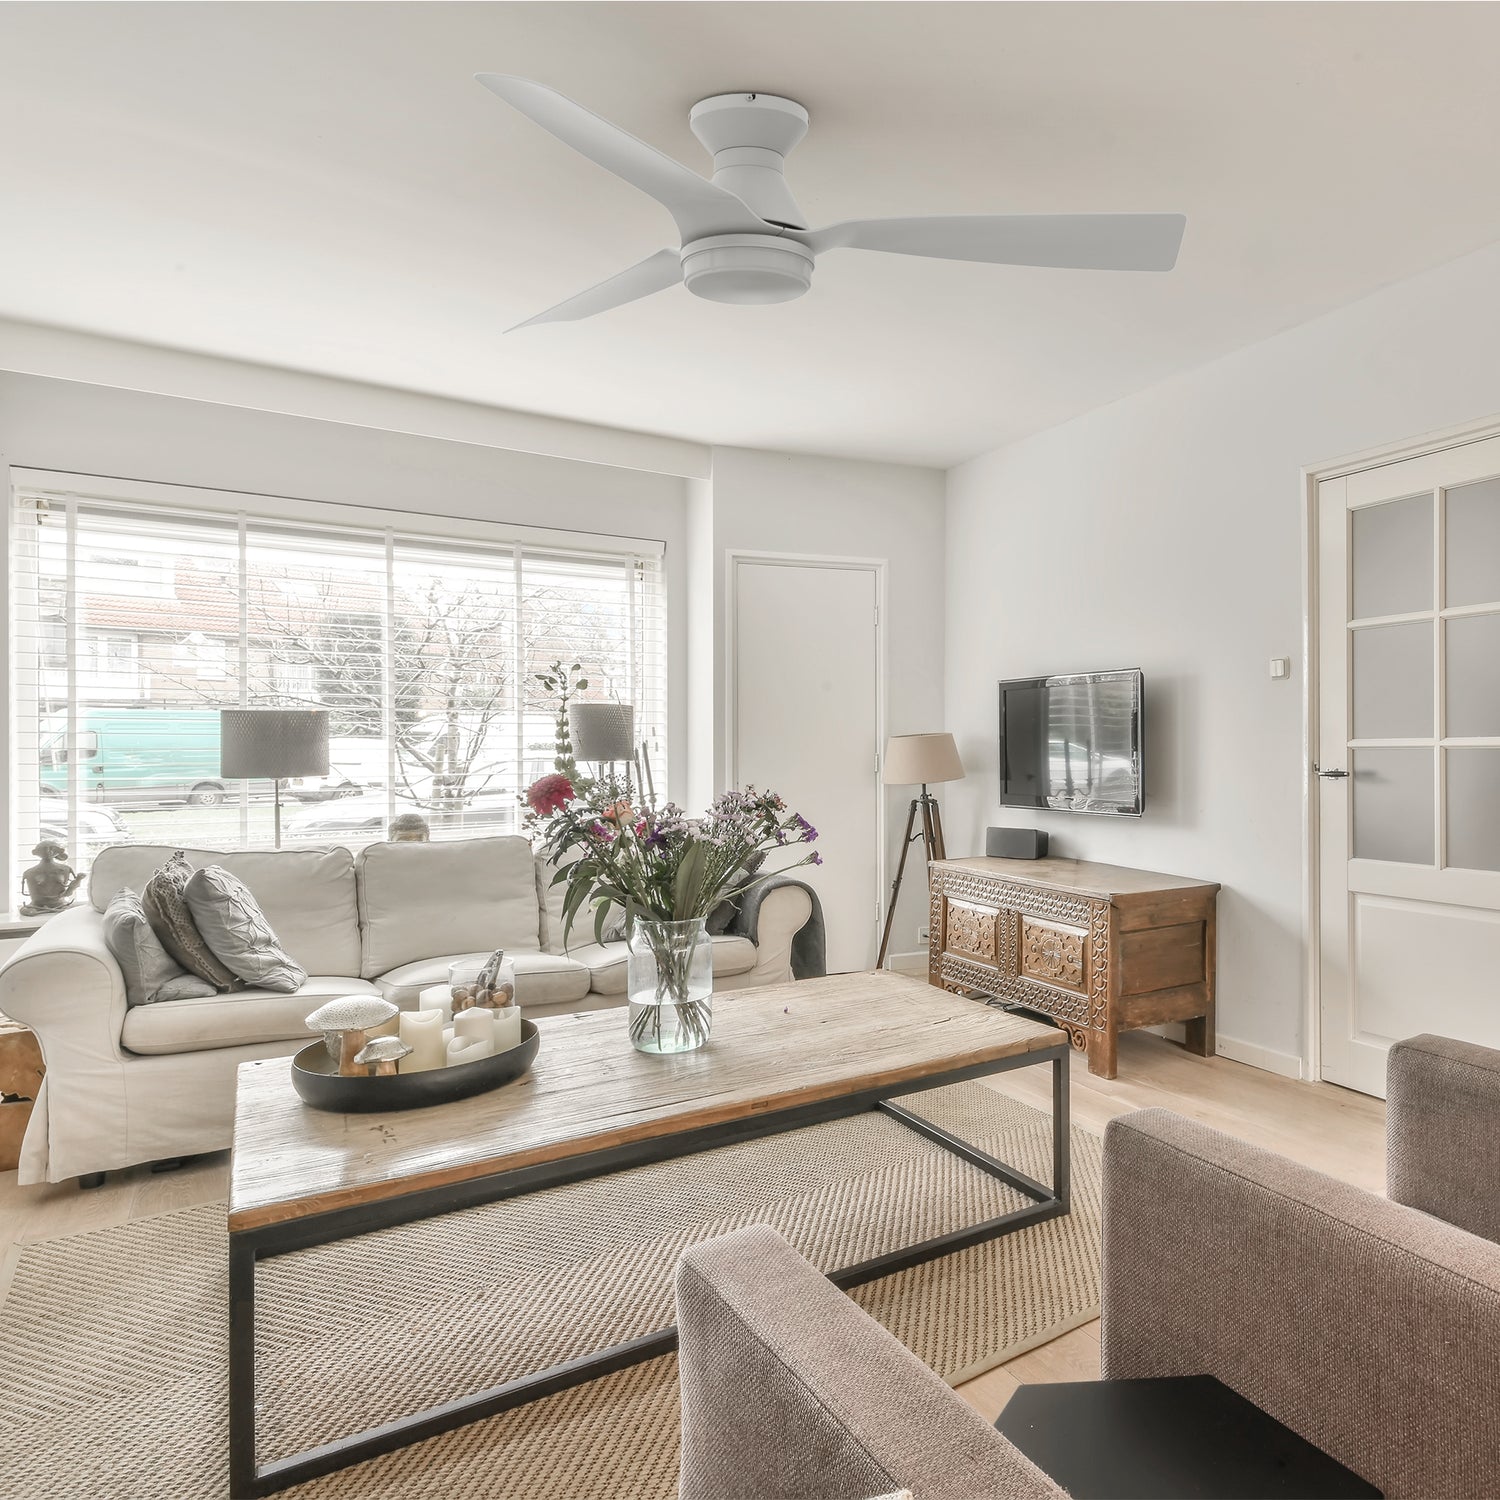 White remote ceilign fan is paired with a white three-seater sofa and interior wood grain furniture, making the living room simple and elegant. 